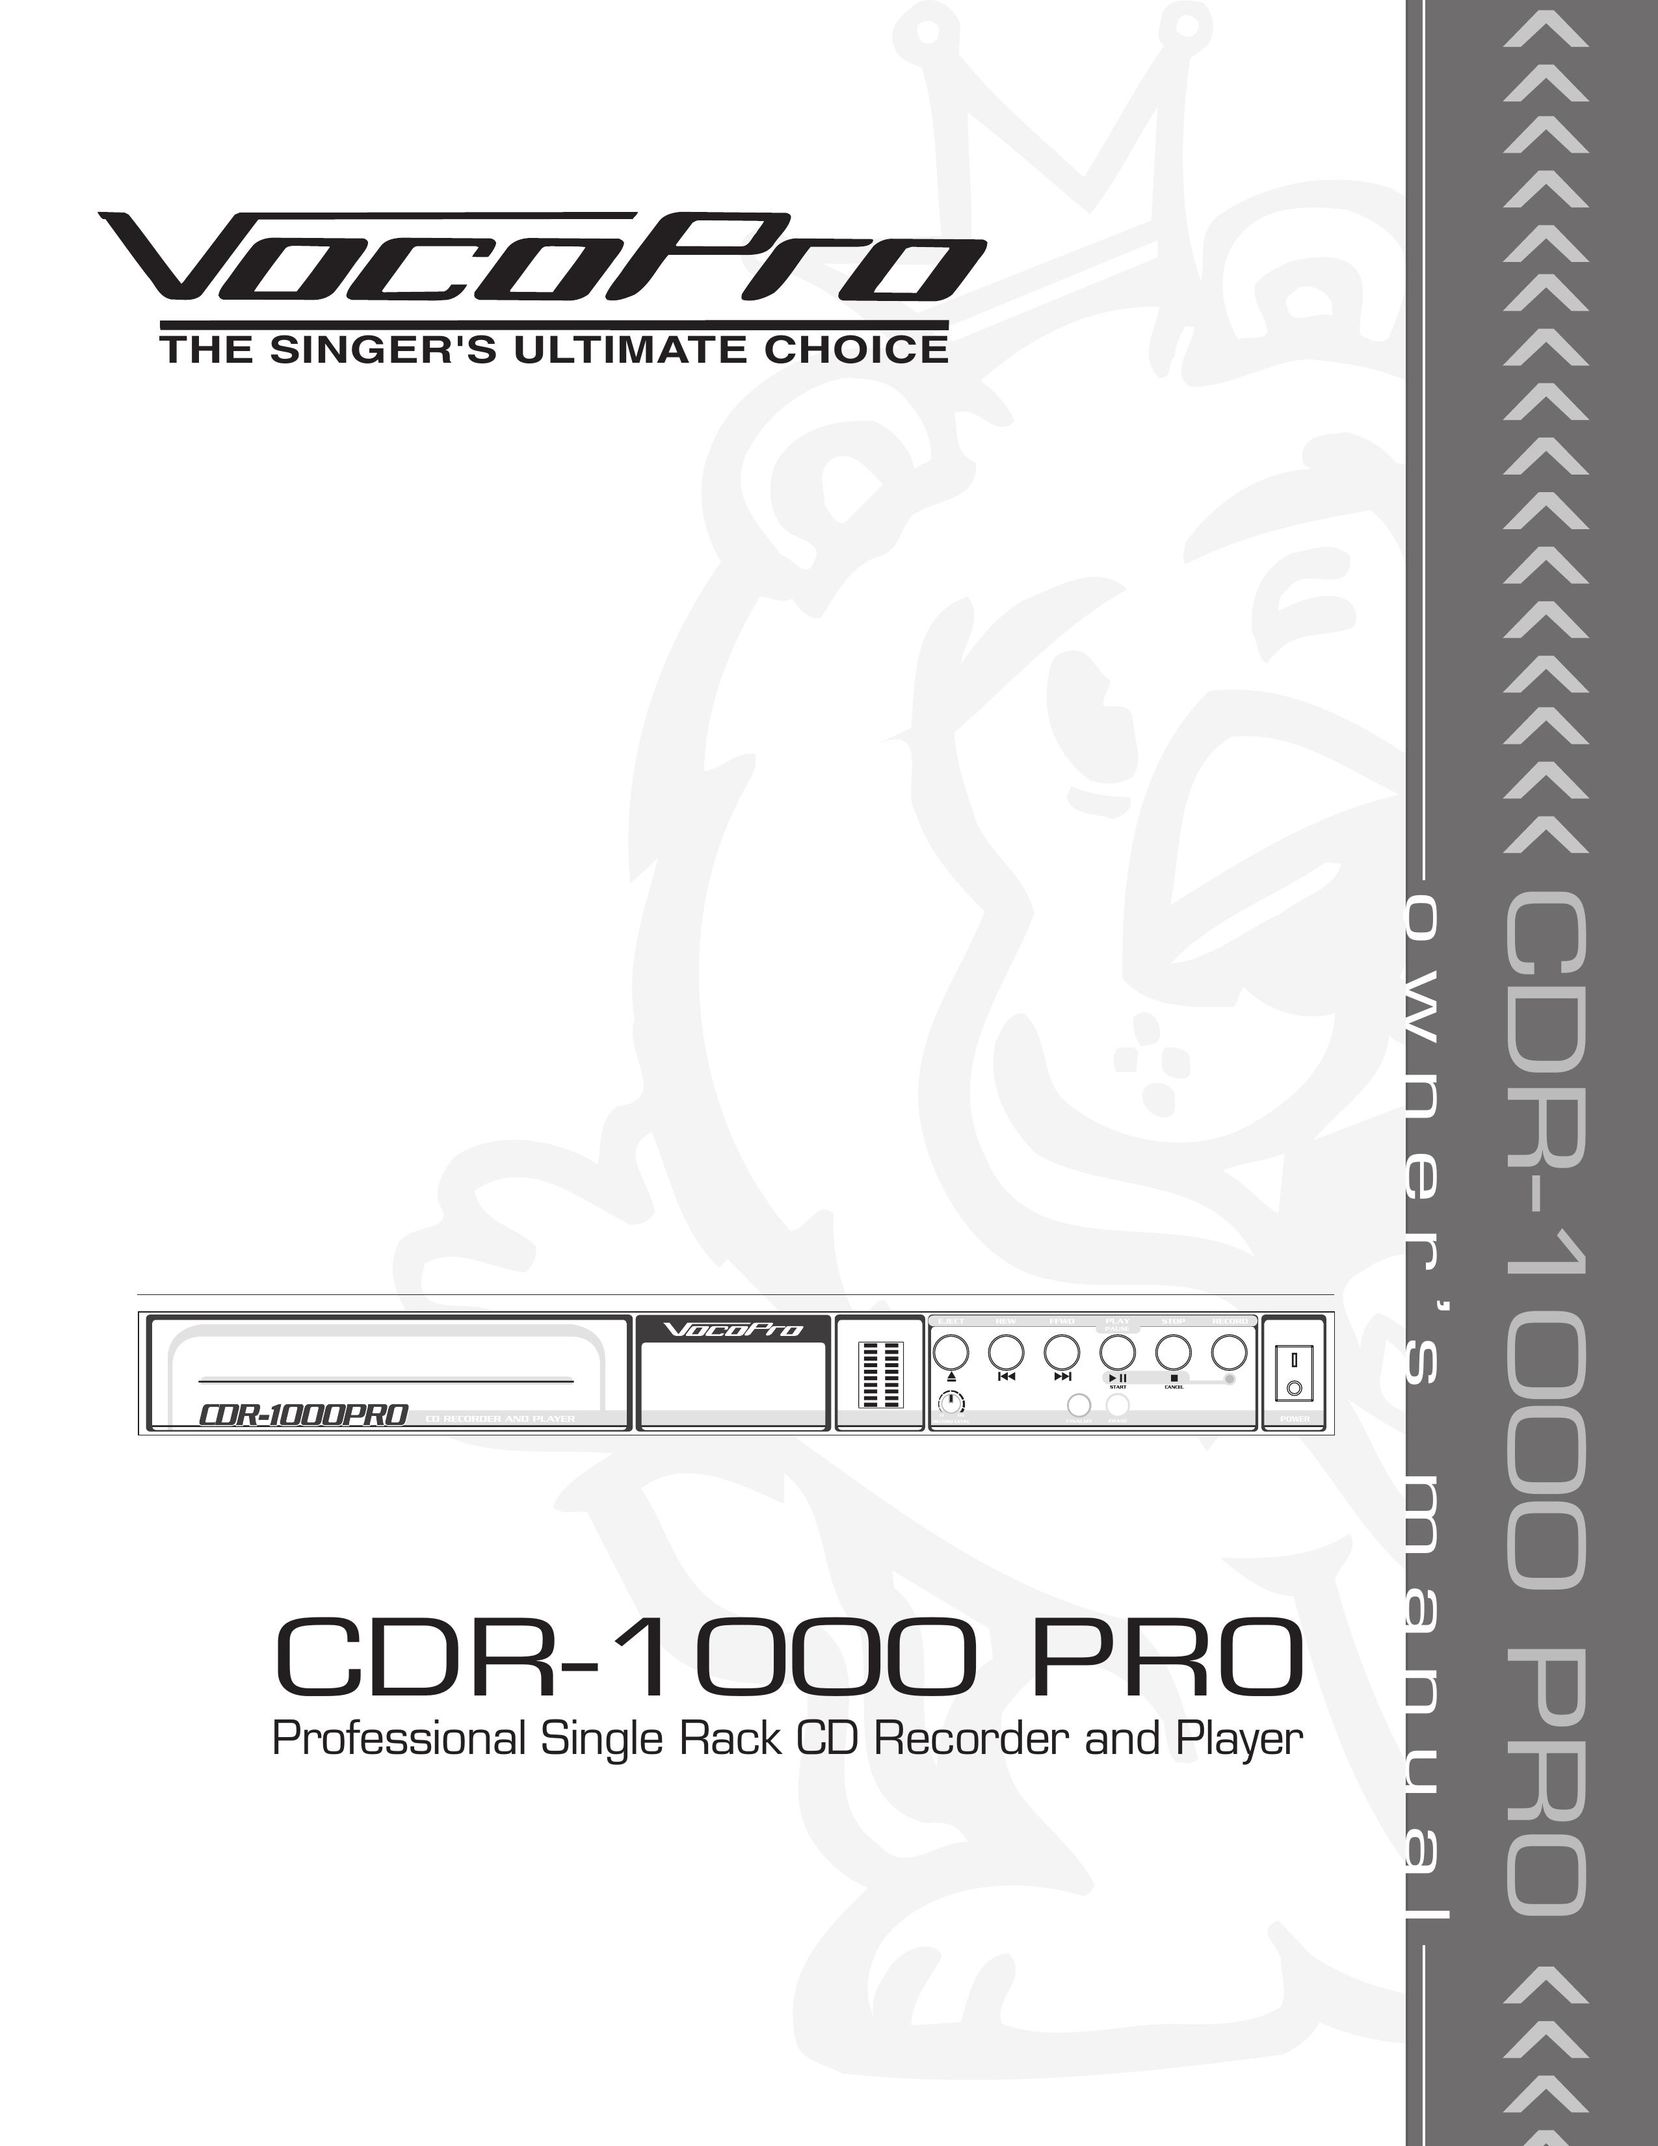 VocoPro CDR-1000 PRO CD Player User Manual